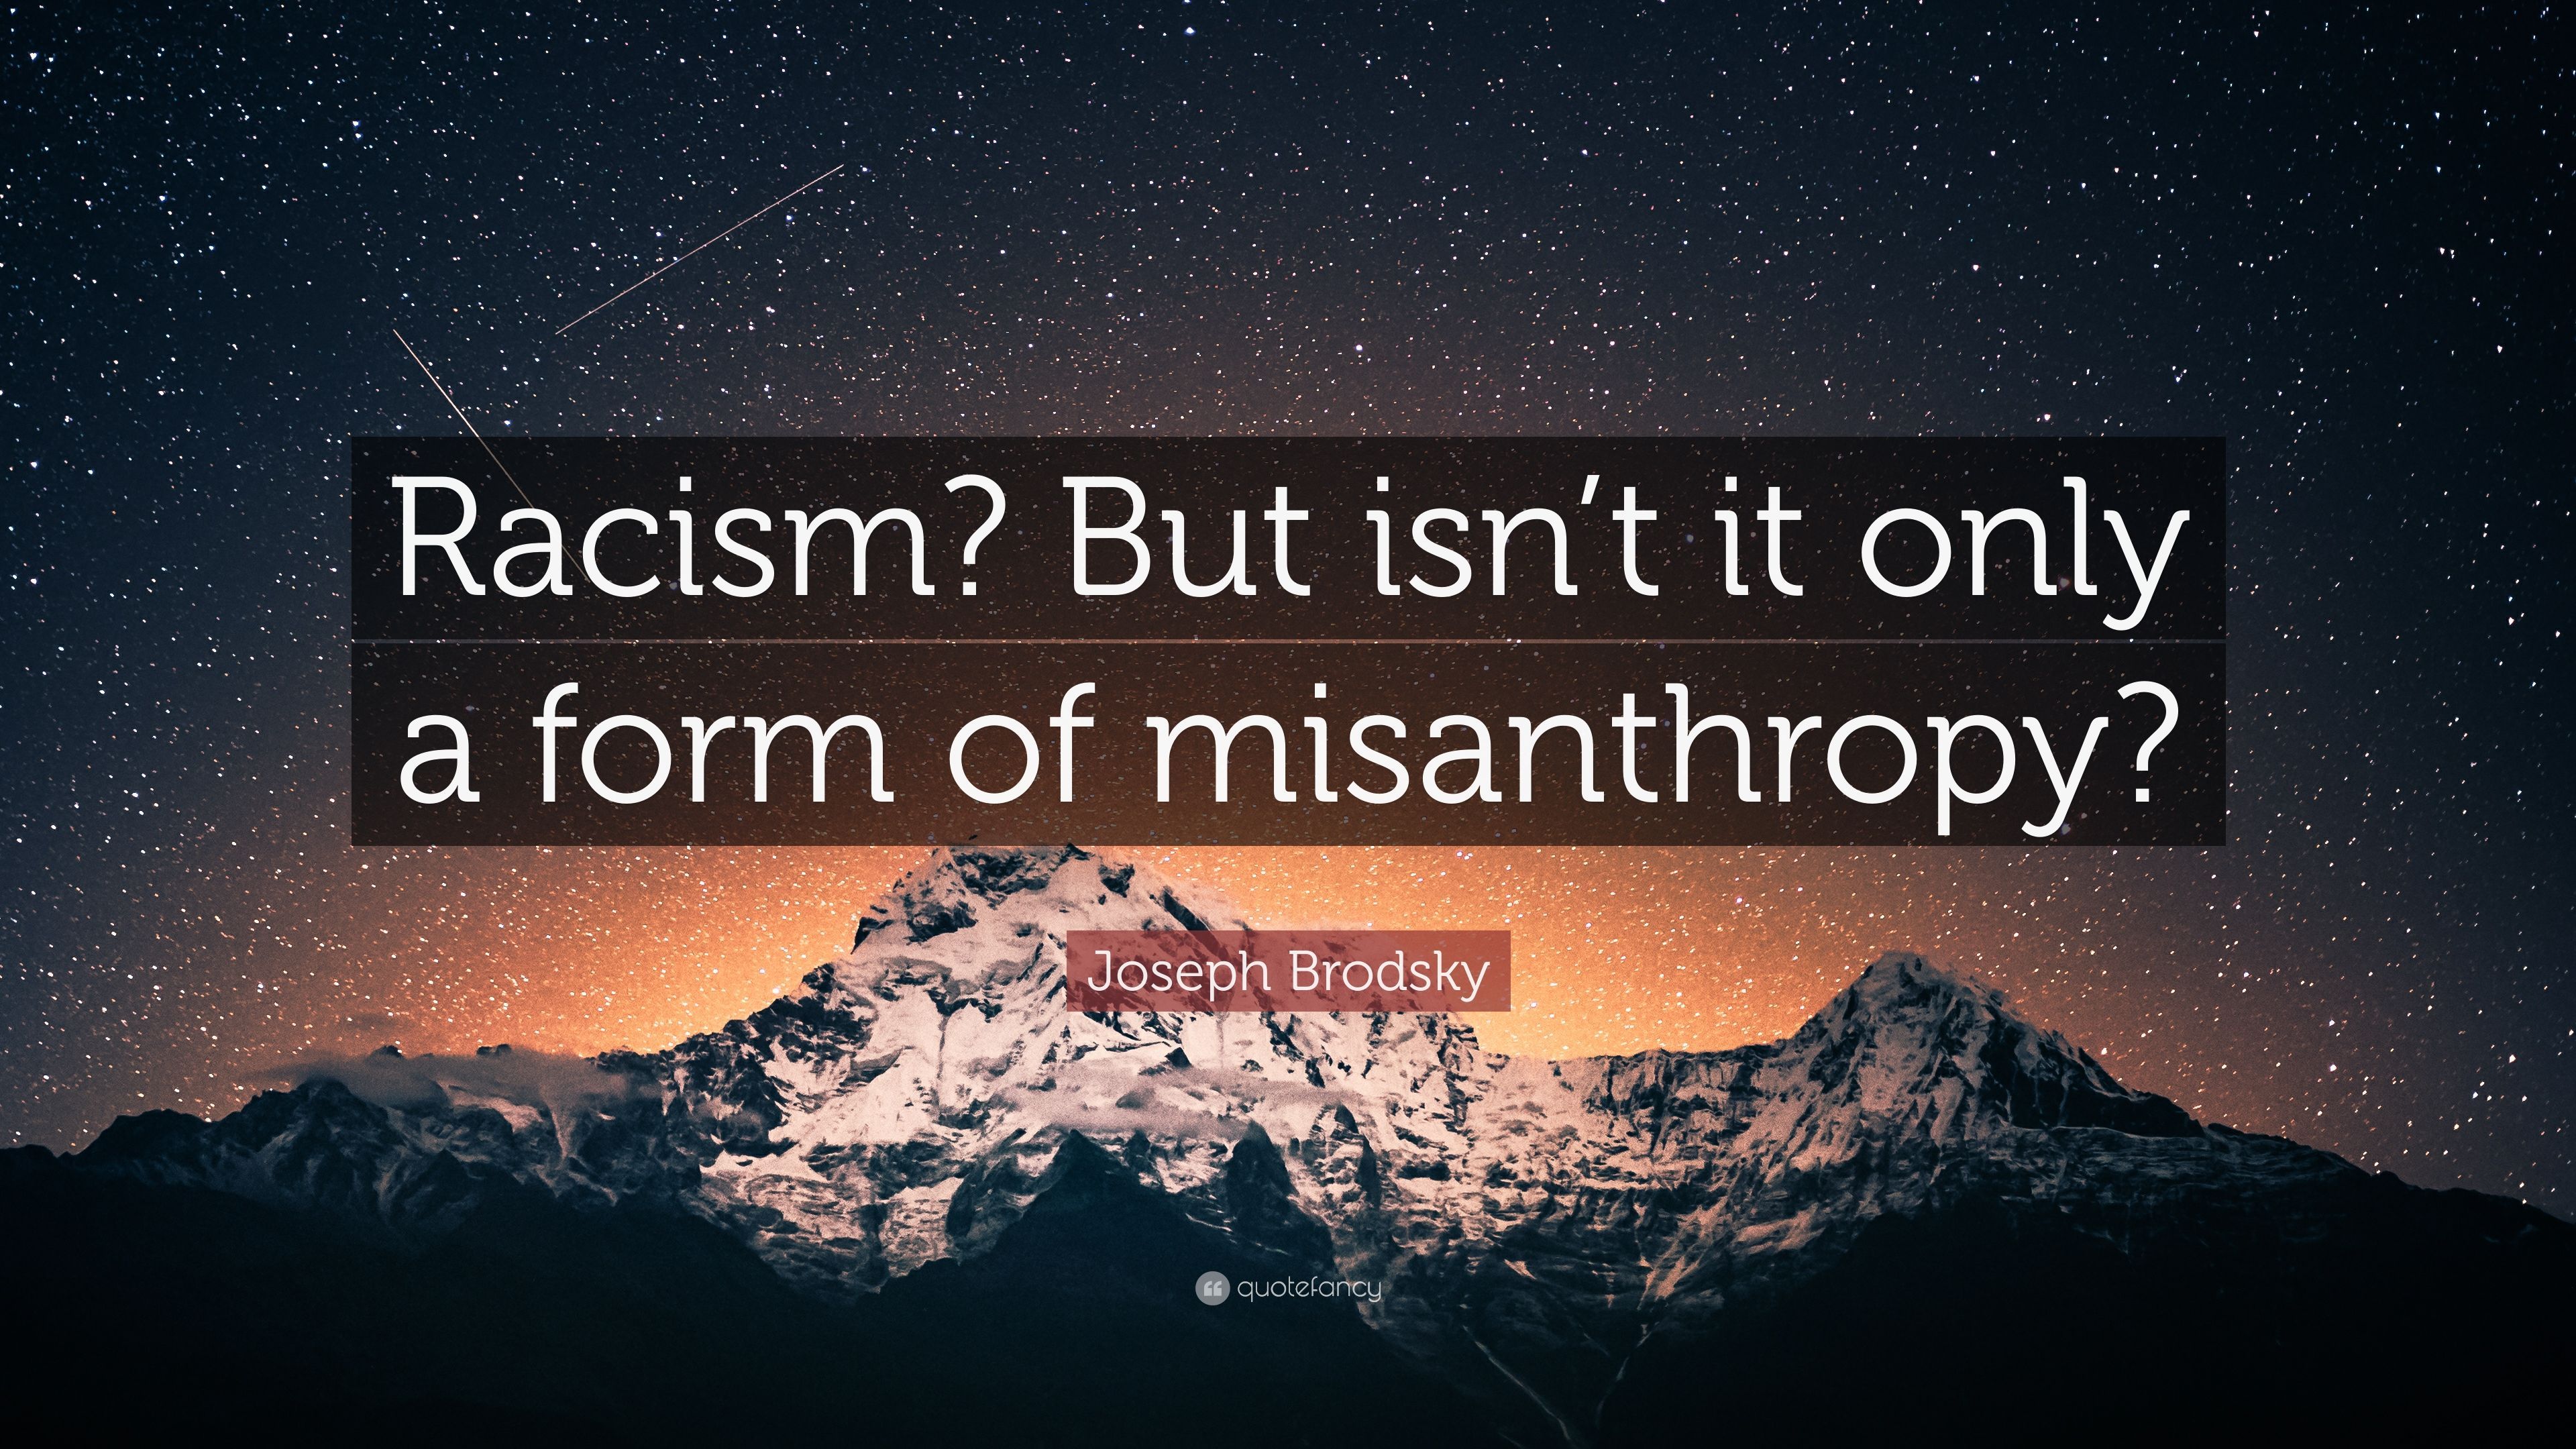 Joseph Brodsky Quote: “Racism? But isn't it only a form of misanthropy?”